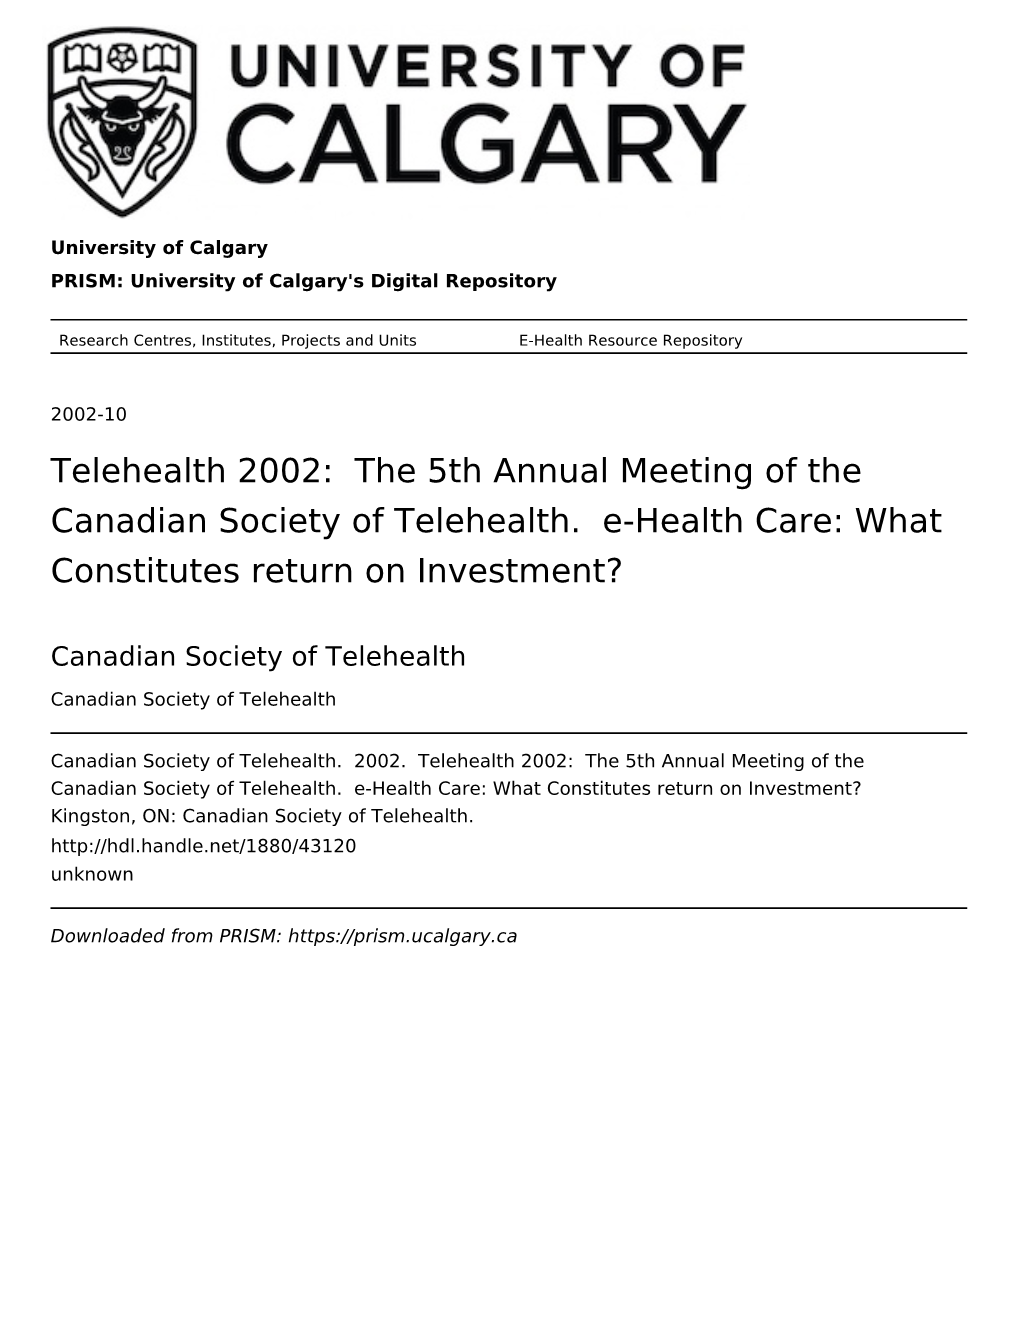 Telehealth 2002: the 5Th Annual Meeting of the Canadian Society of Telehealth